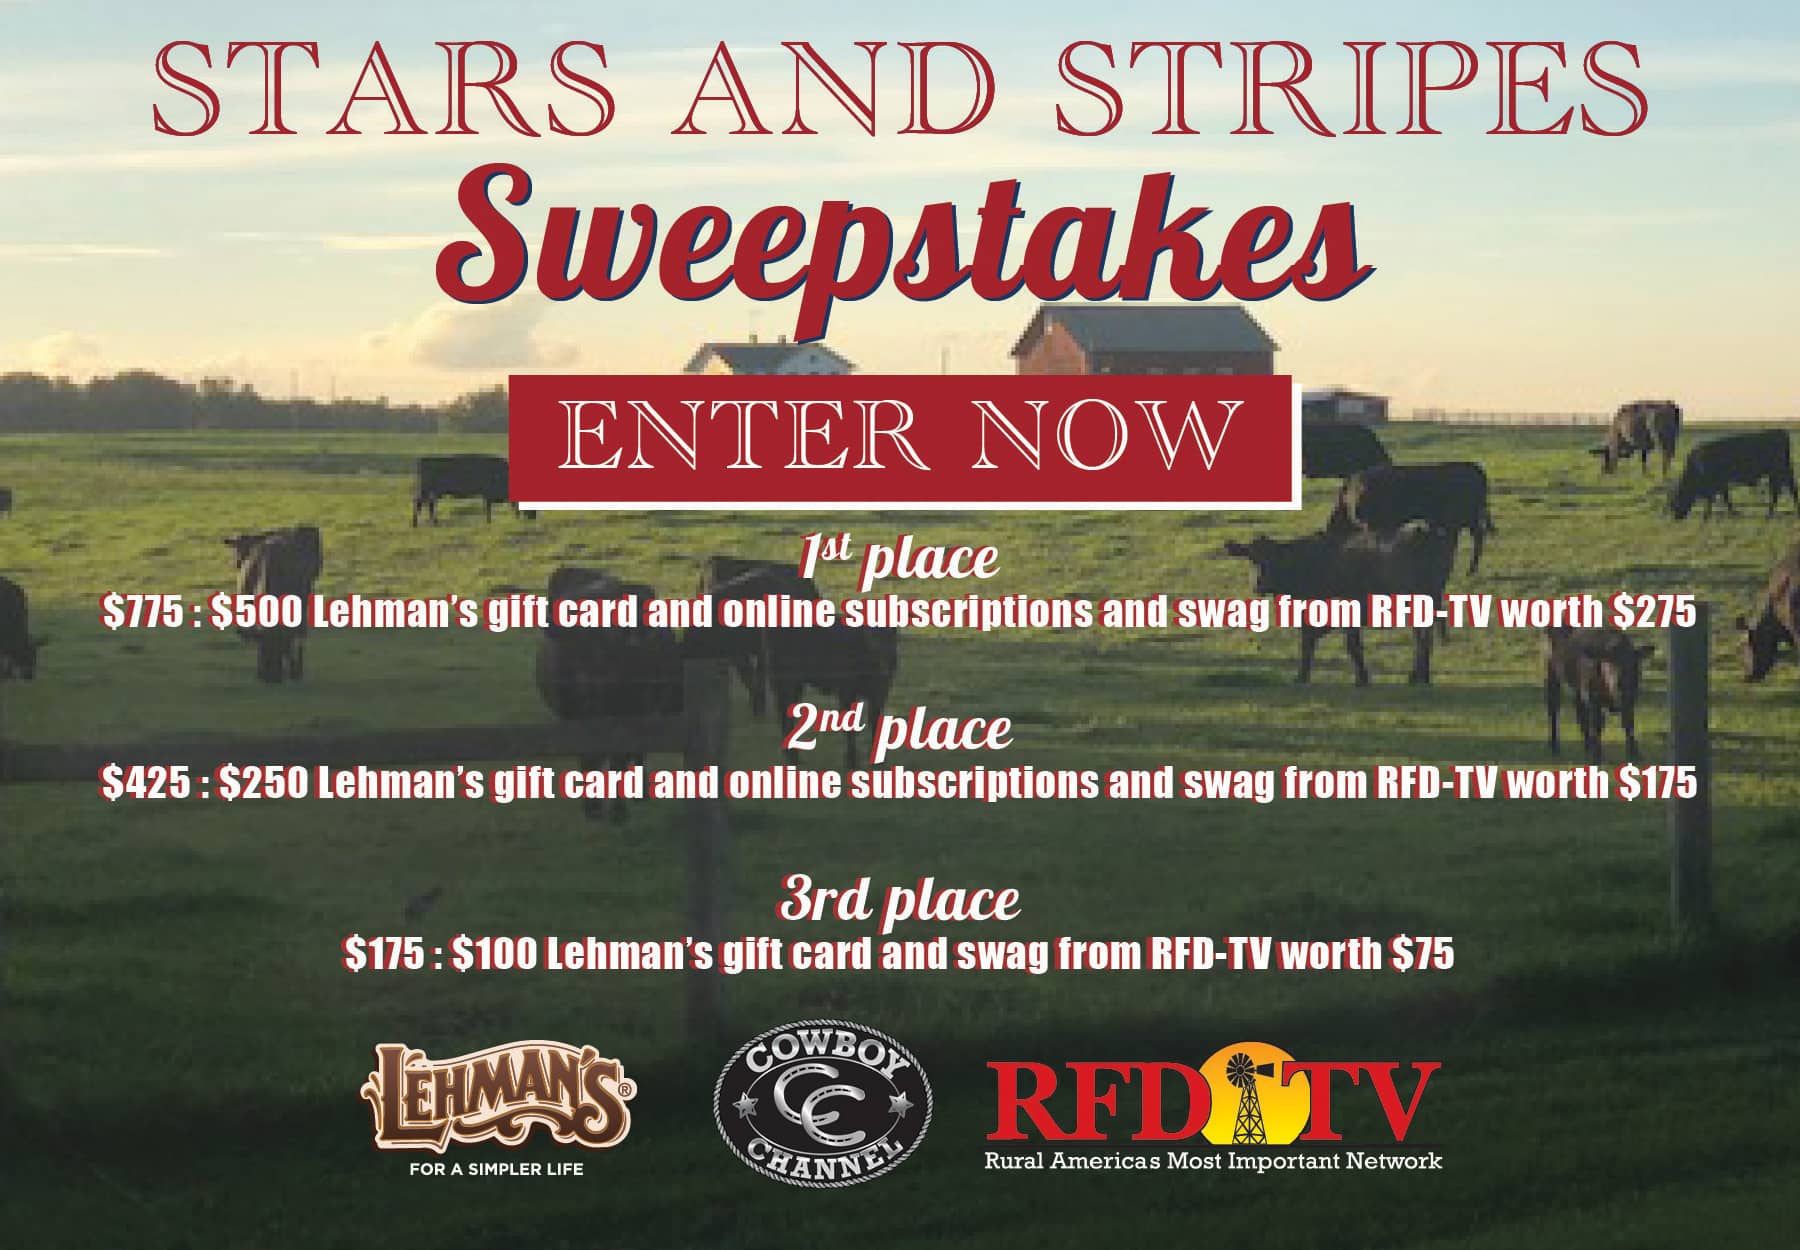 Stars and Stripes Sweepstakes